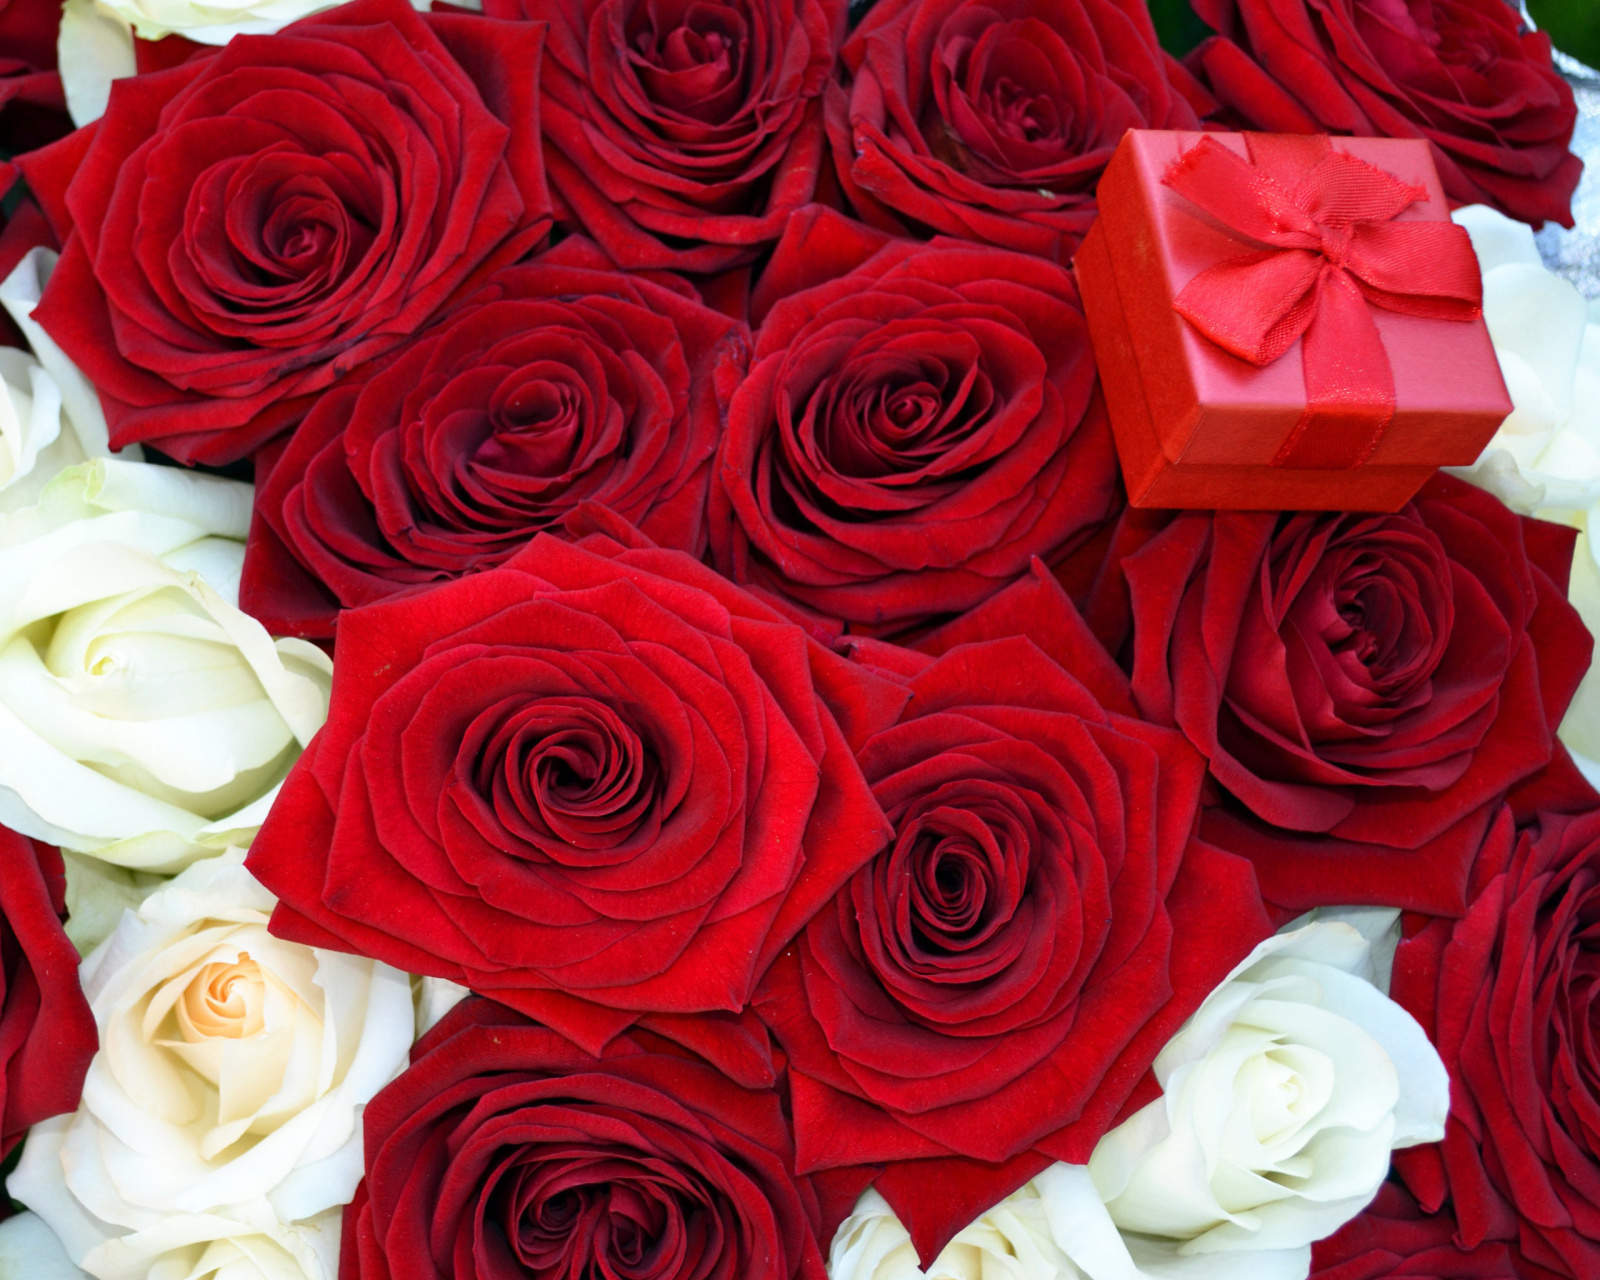 Roses for Propose wallpaper 1600x1280